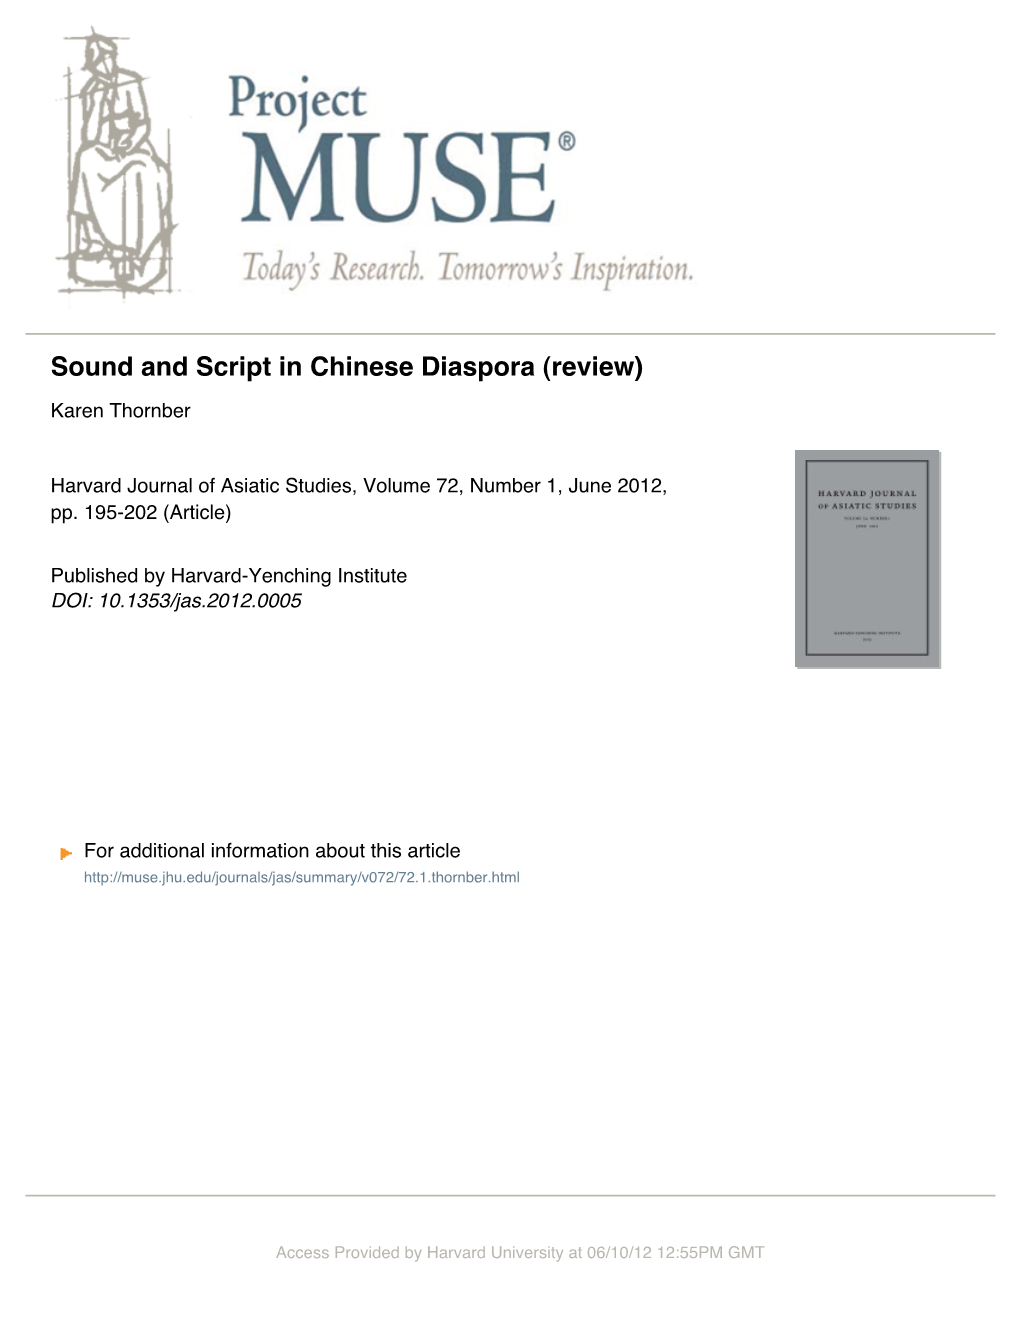 Sound and Script in Chinese Diaspora (Review)